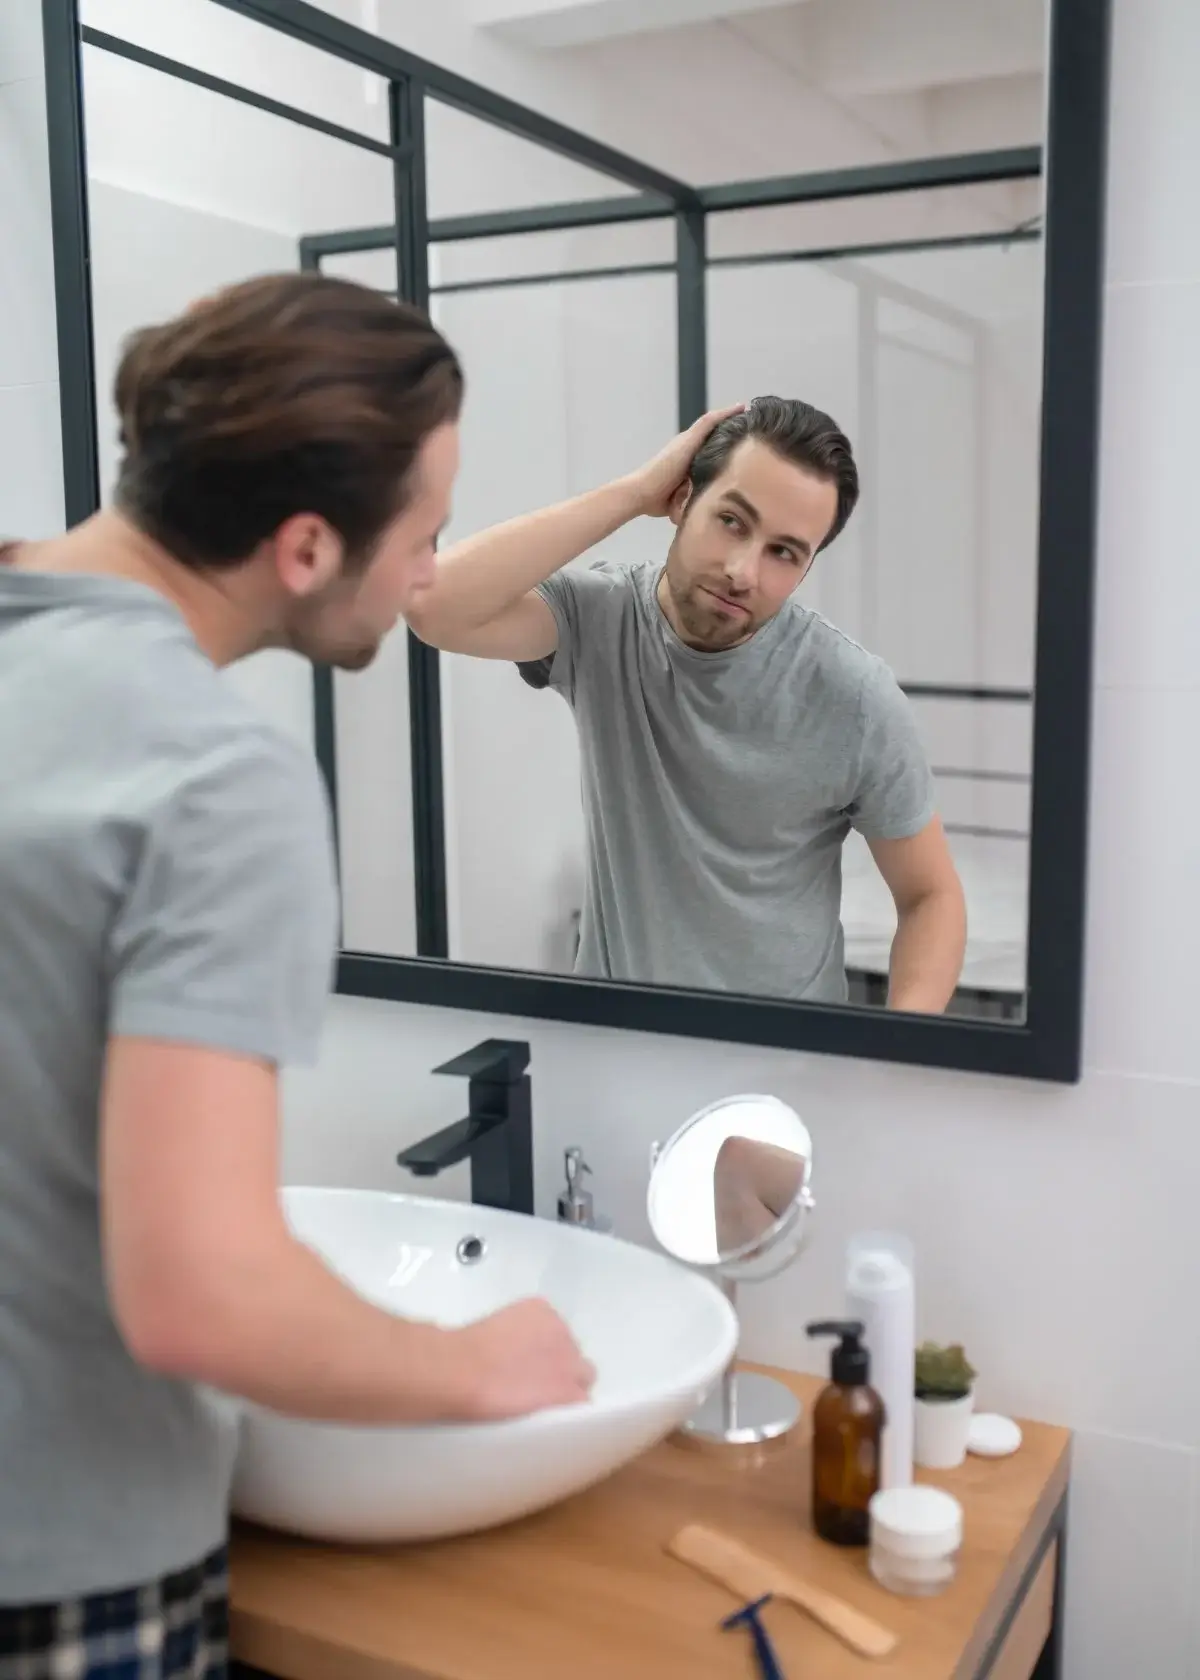 How can a shampoo for thinning hair benefit men experiencing hair loss?